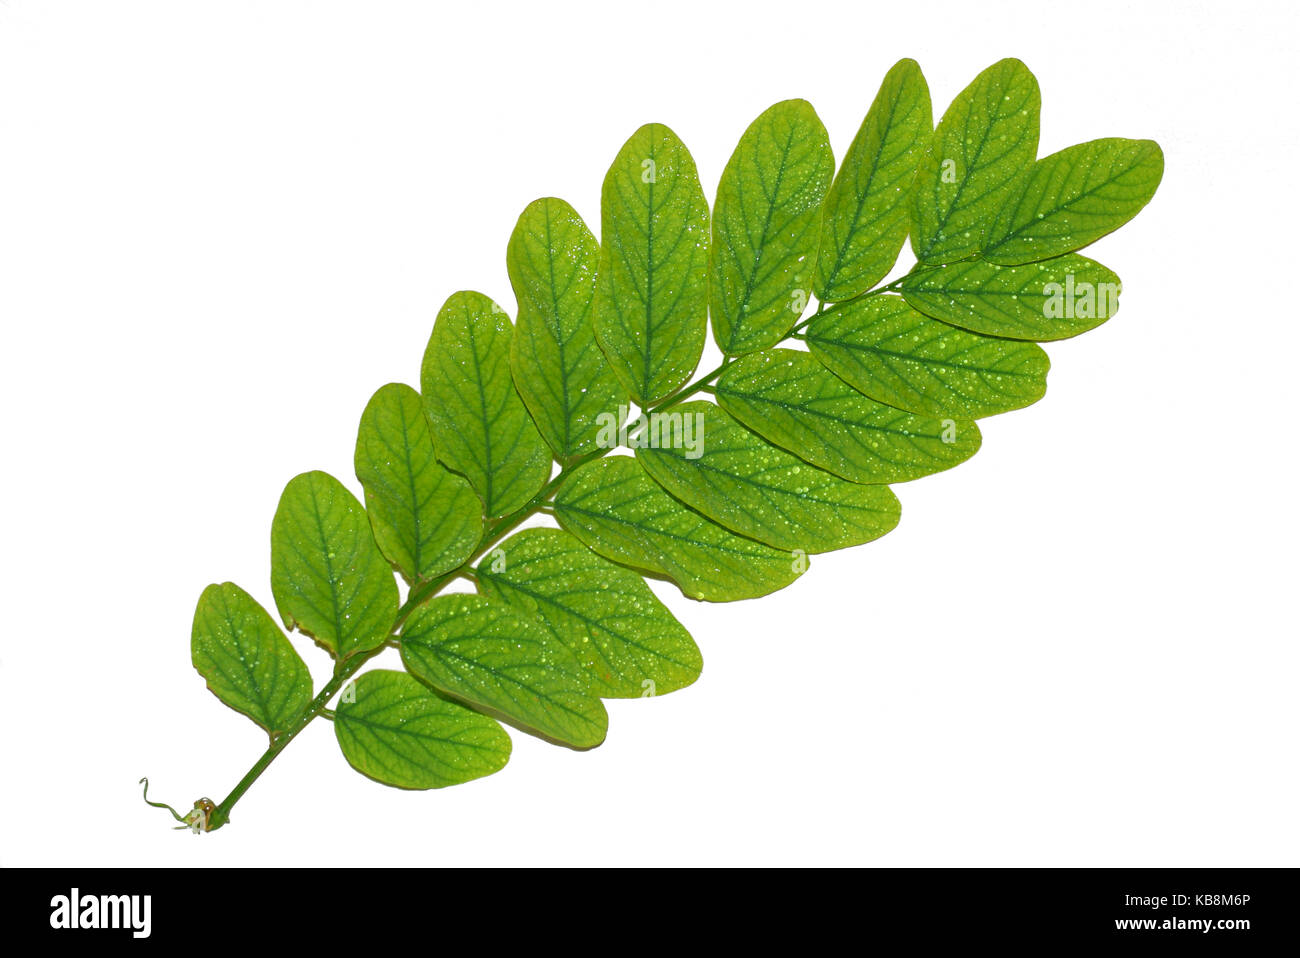 African Acacia Tree Leaves